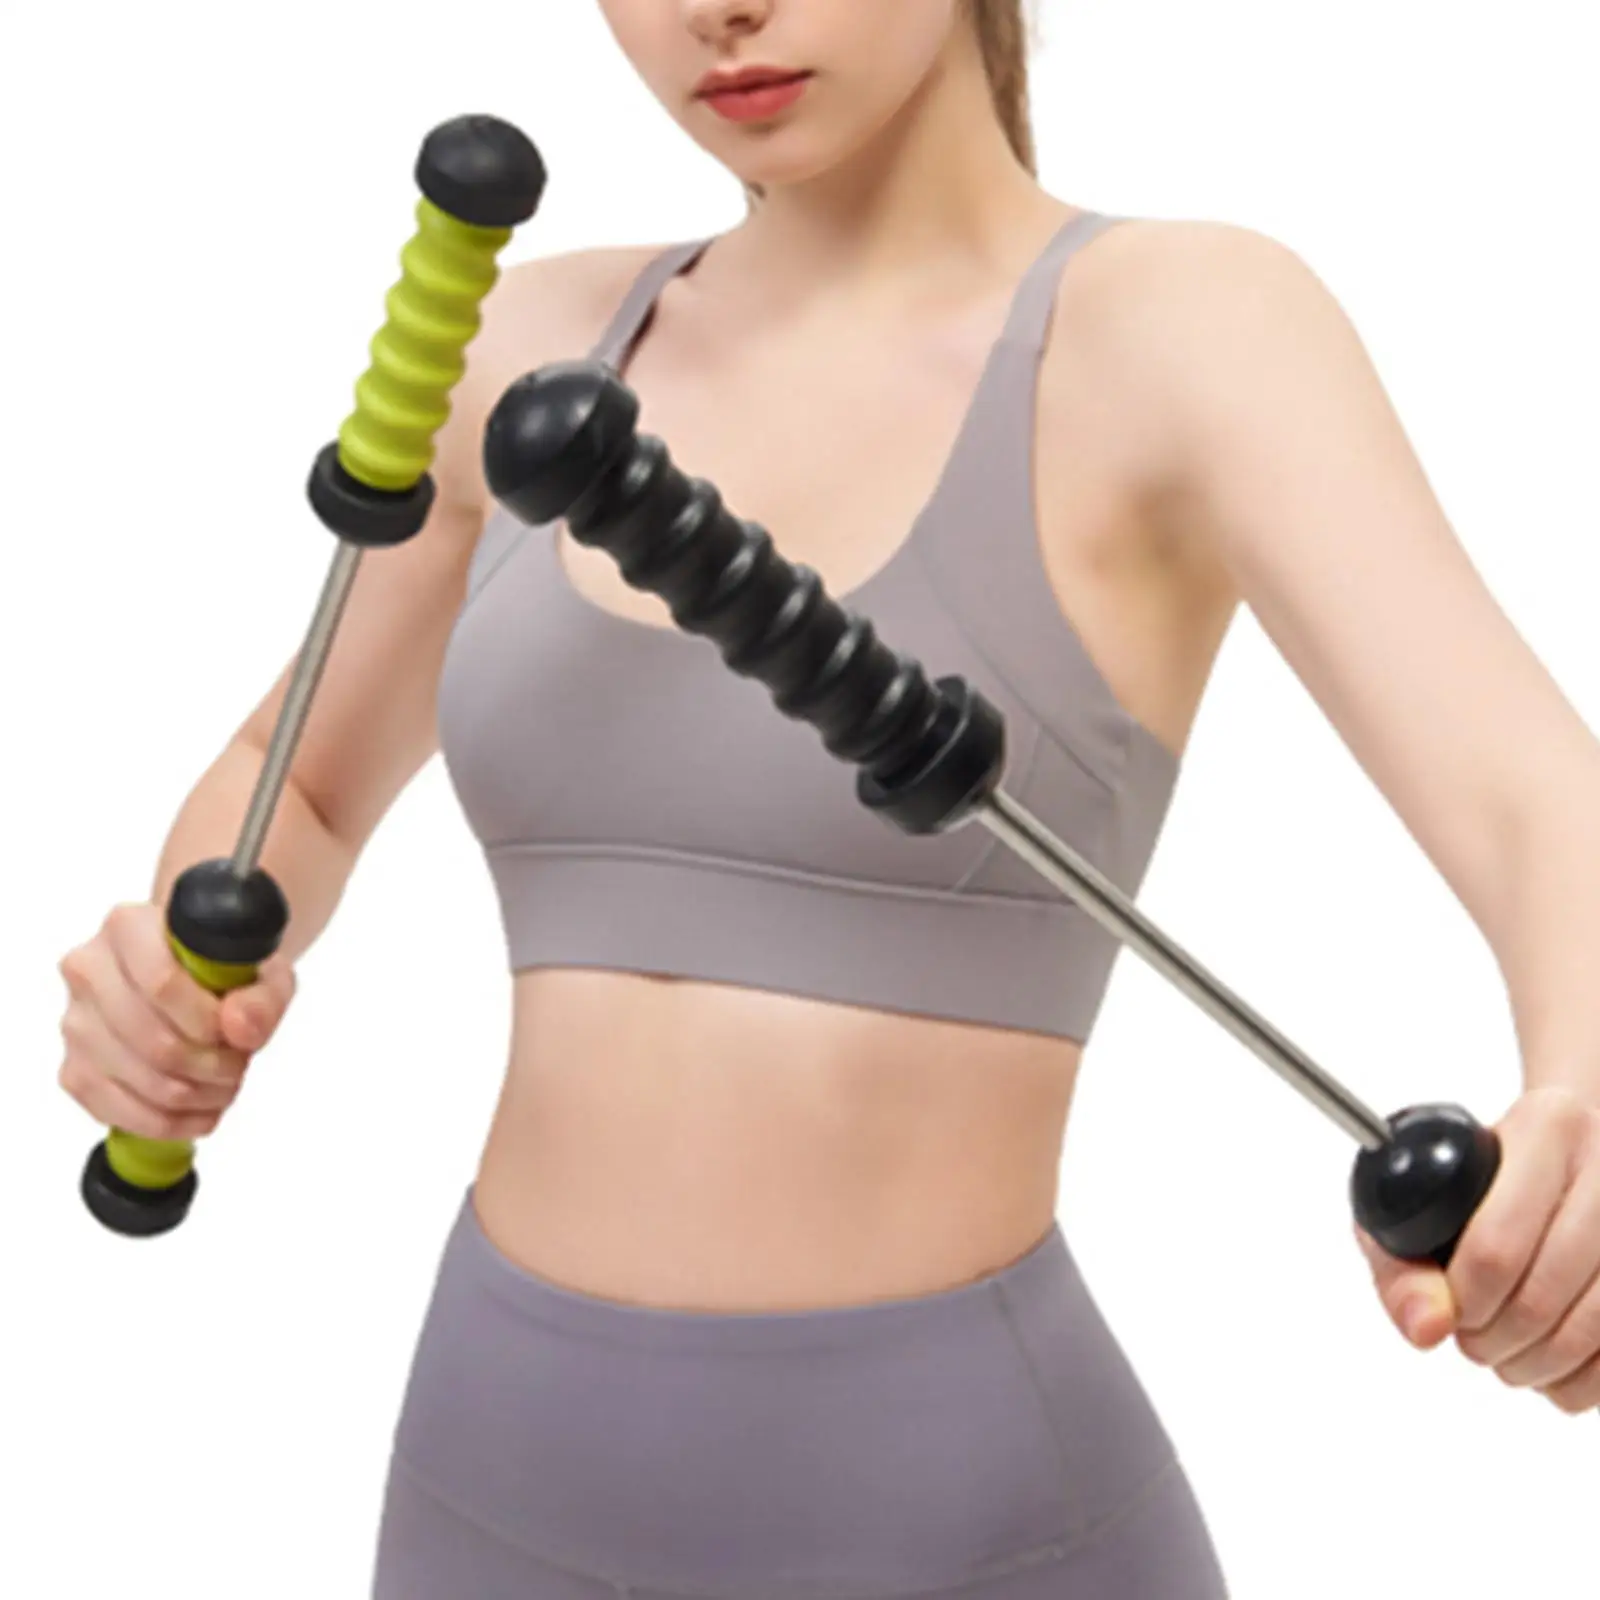 

Arm Power Exerciser Muscle Pulling Heavy Duty Back Puller Power Bar Resistance Exercise Bands for Muscle Builder Gym Women Men